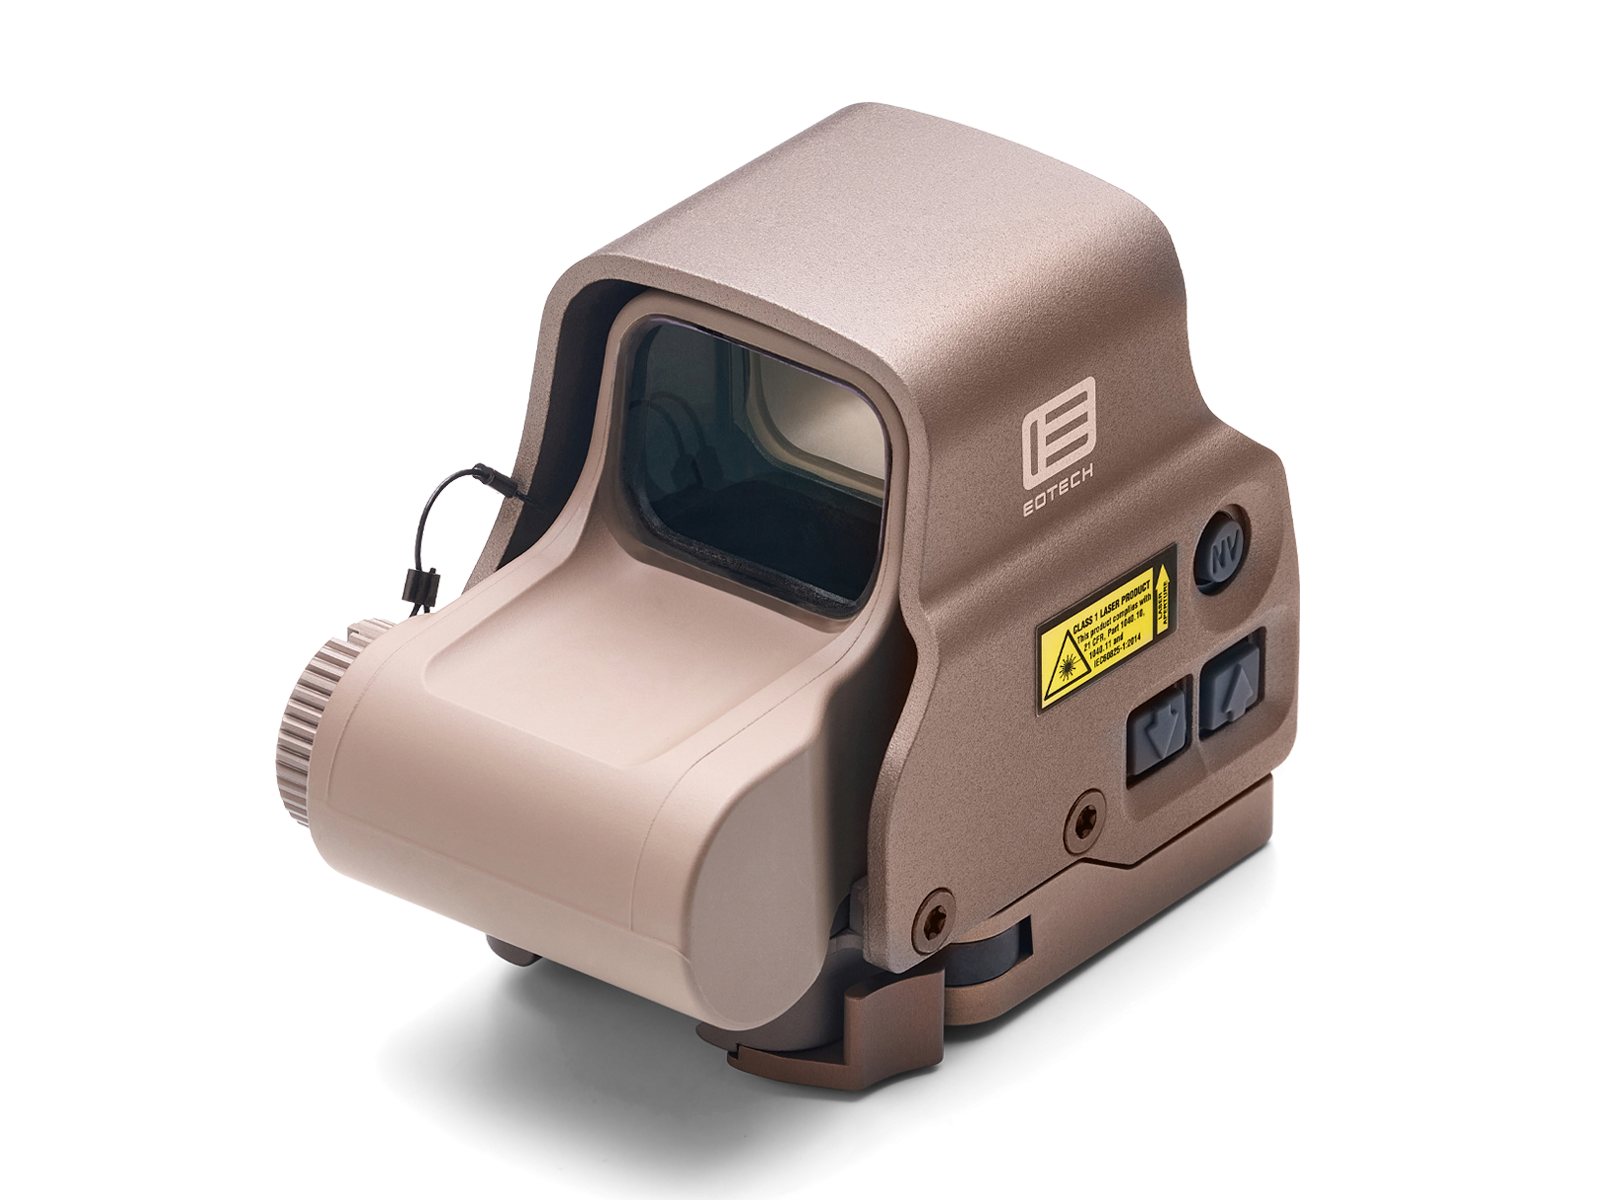 EOTECH HWS EXPS3 Holographic Weapon Sight, Night Vision Compatible, Tan (EXPS3-0TAN)